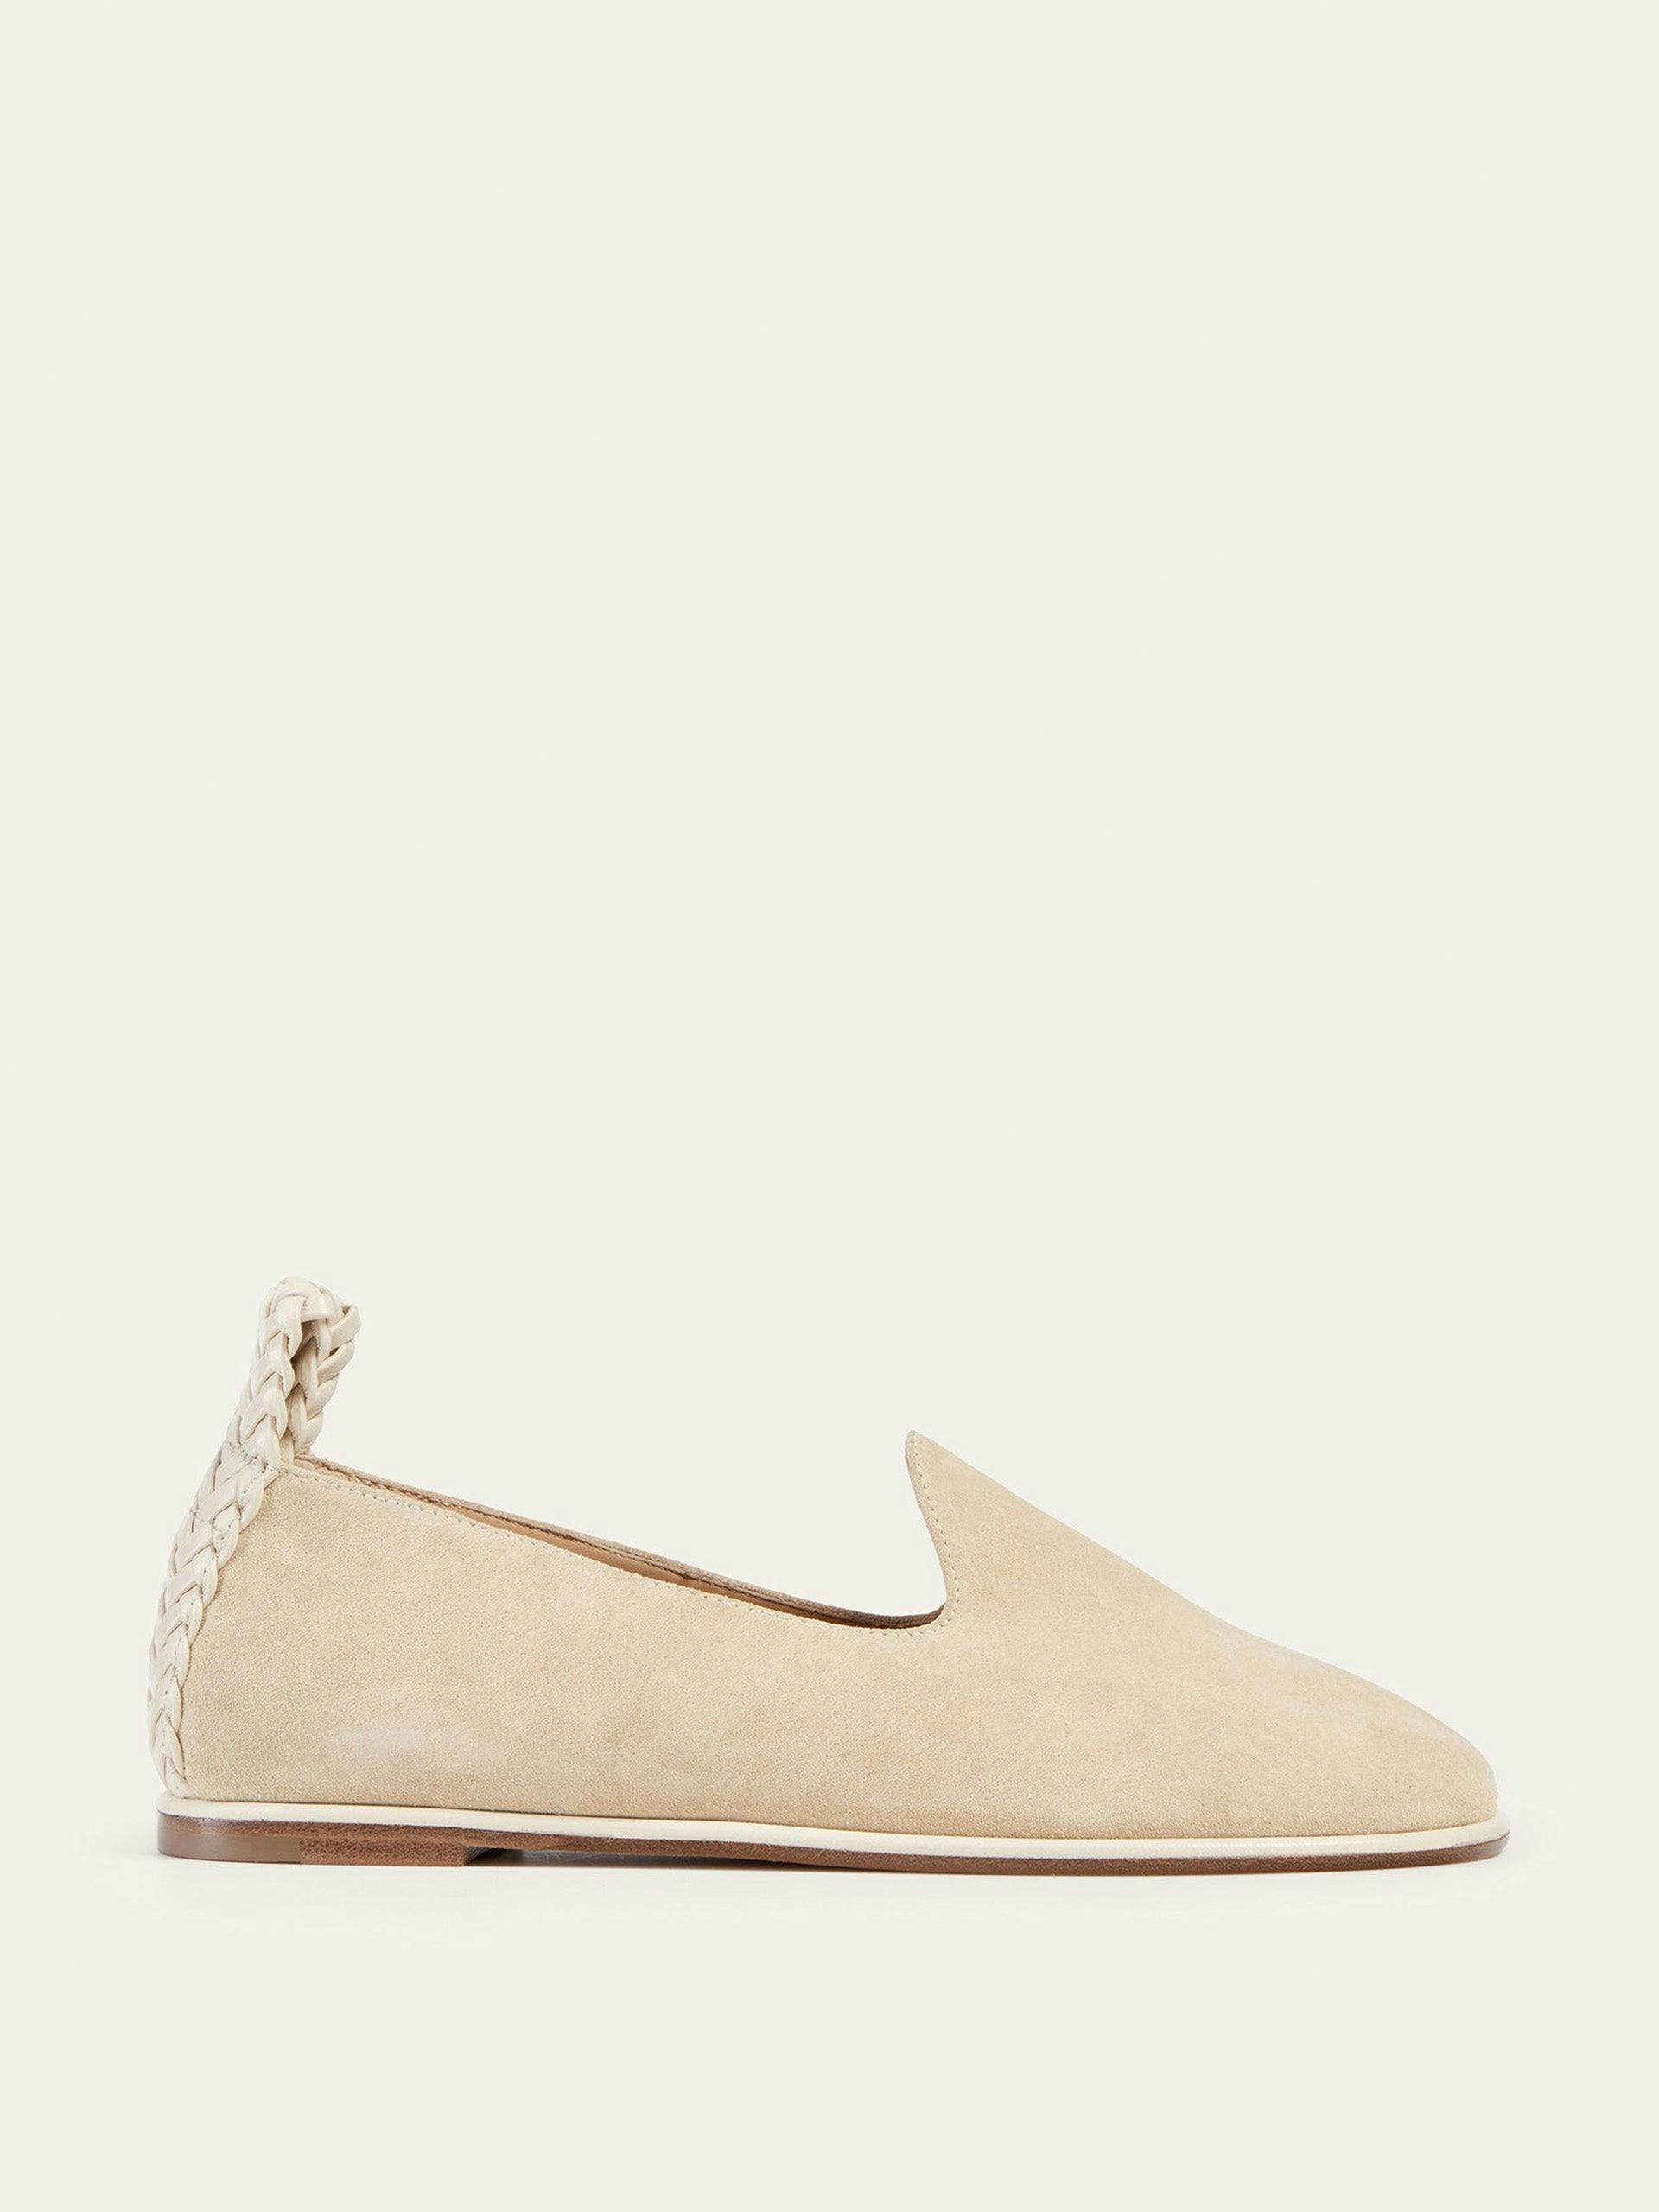 Nappa leather Mika loafers in Sand